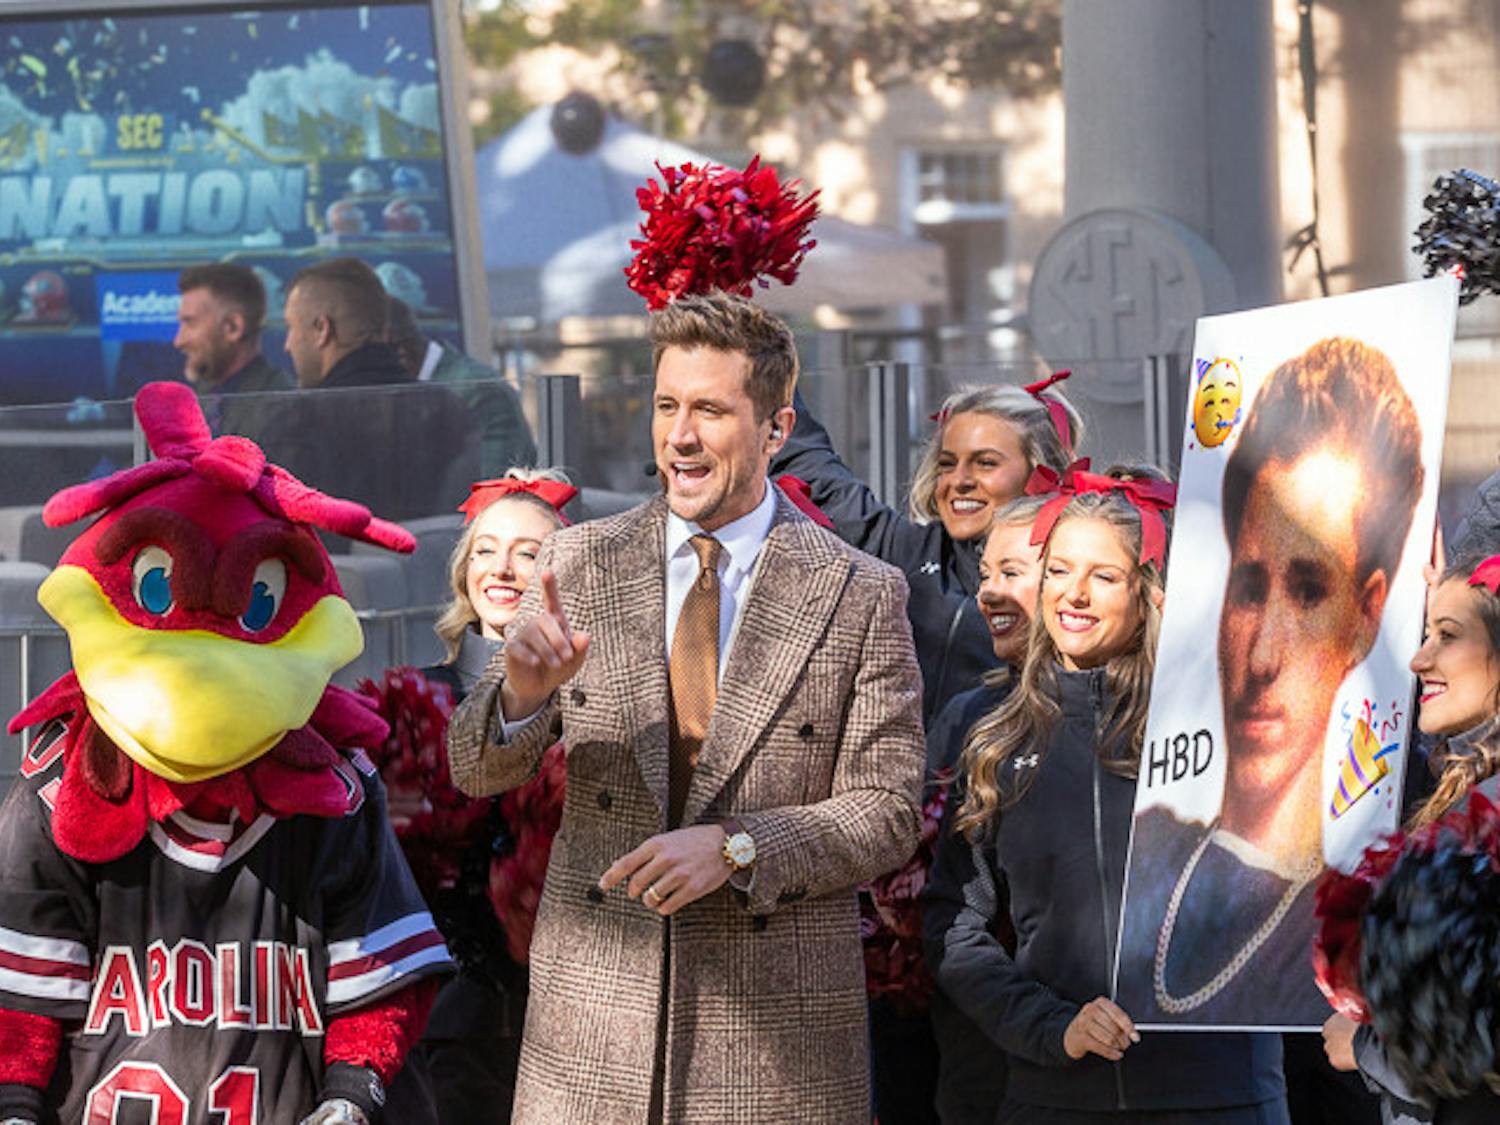 Jordan Rodgers poses with Cocky and the USC cheer team during the SEC Morning Show on Nov. 19, 2022. Rodgers is a sports commentator and played quarterback for the Vanderbilt Commodores and the Jacksonville Jaguars.